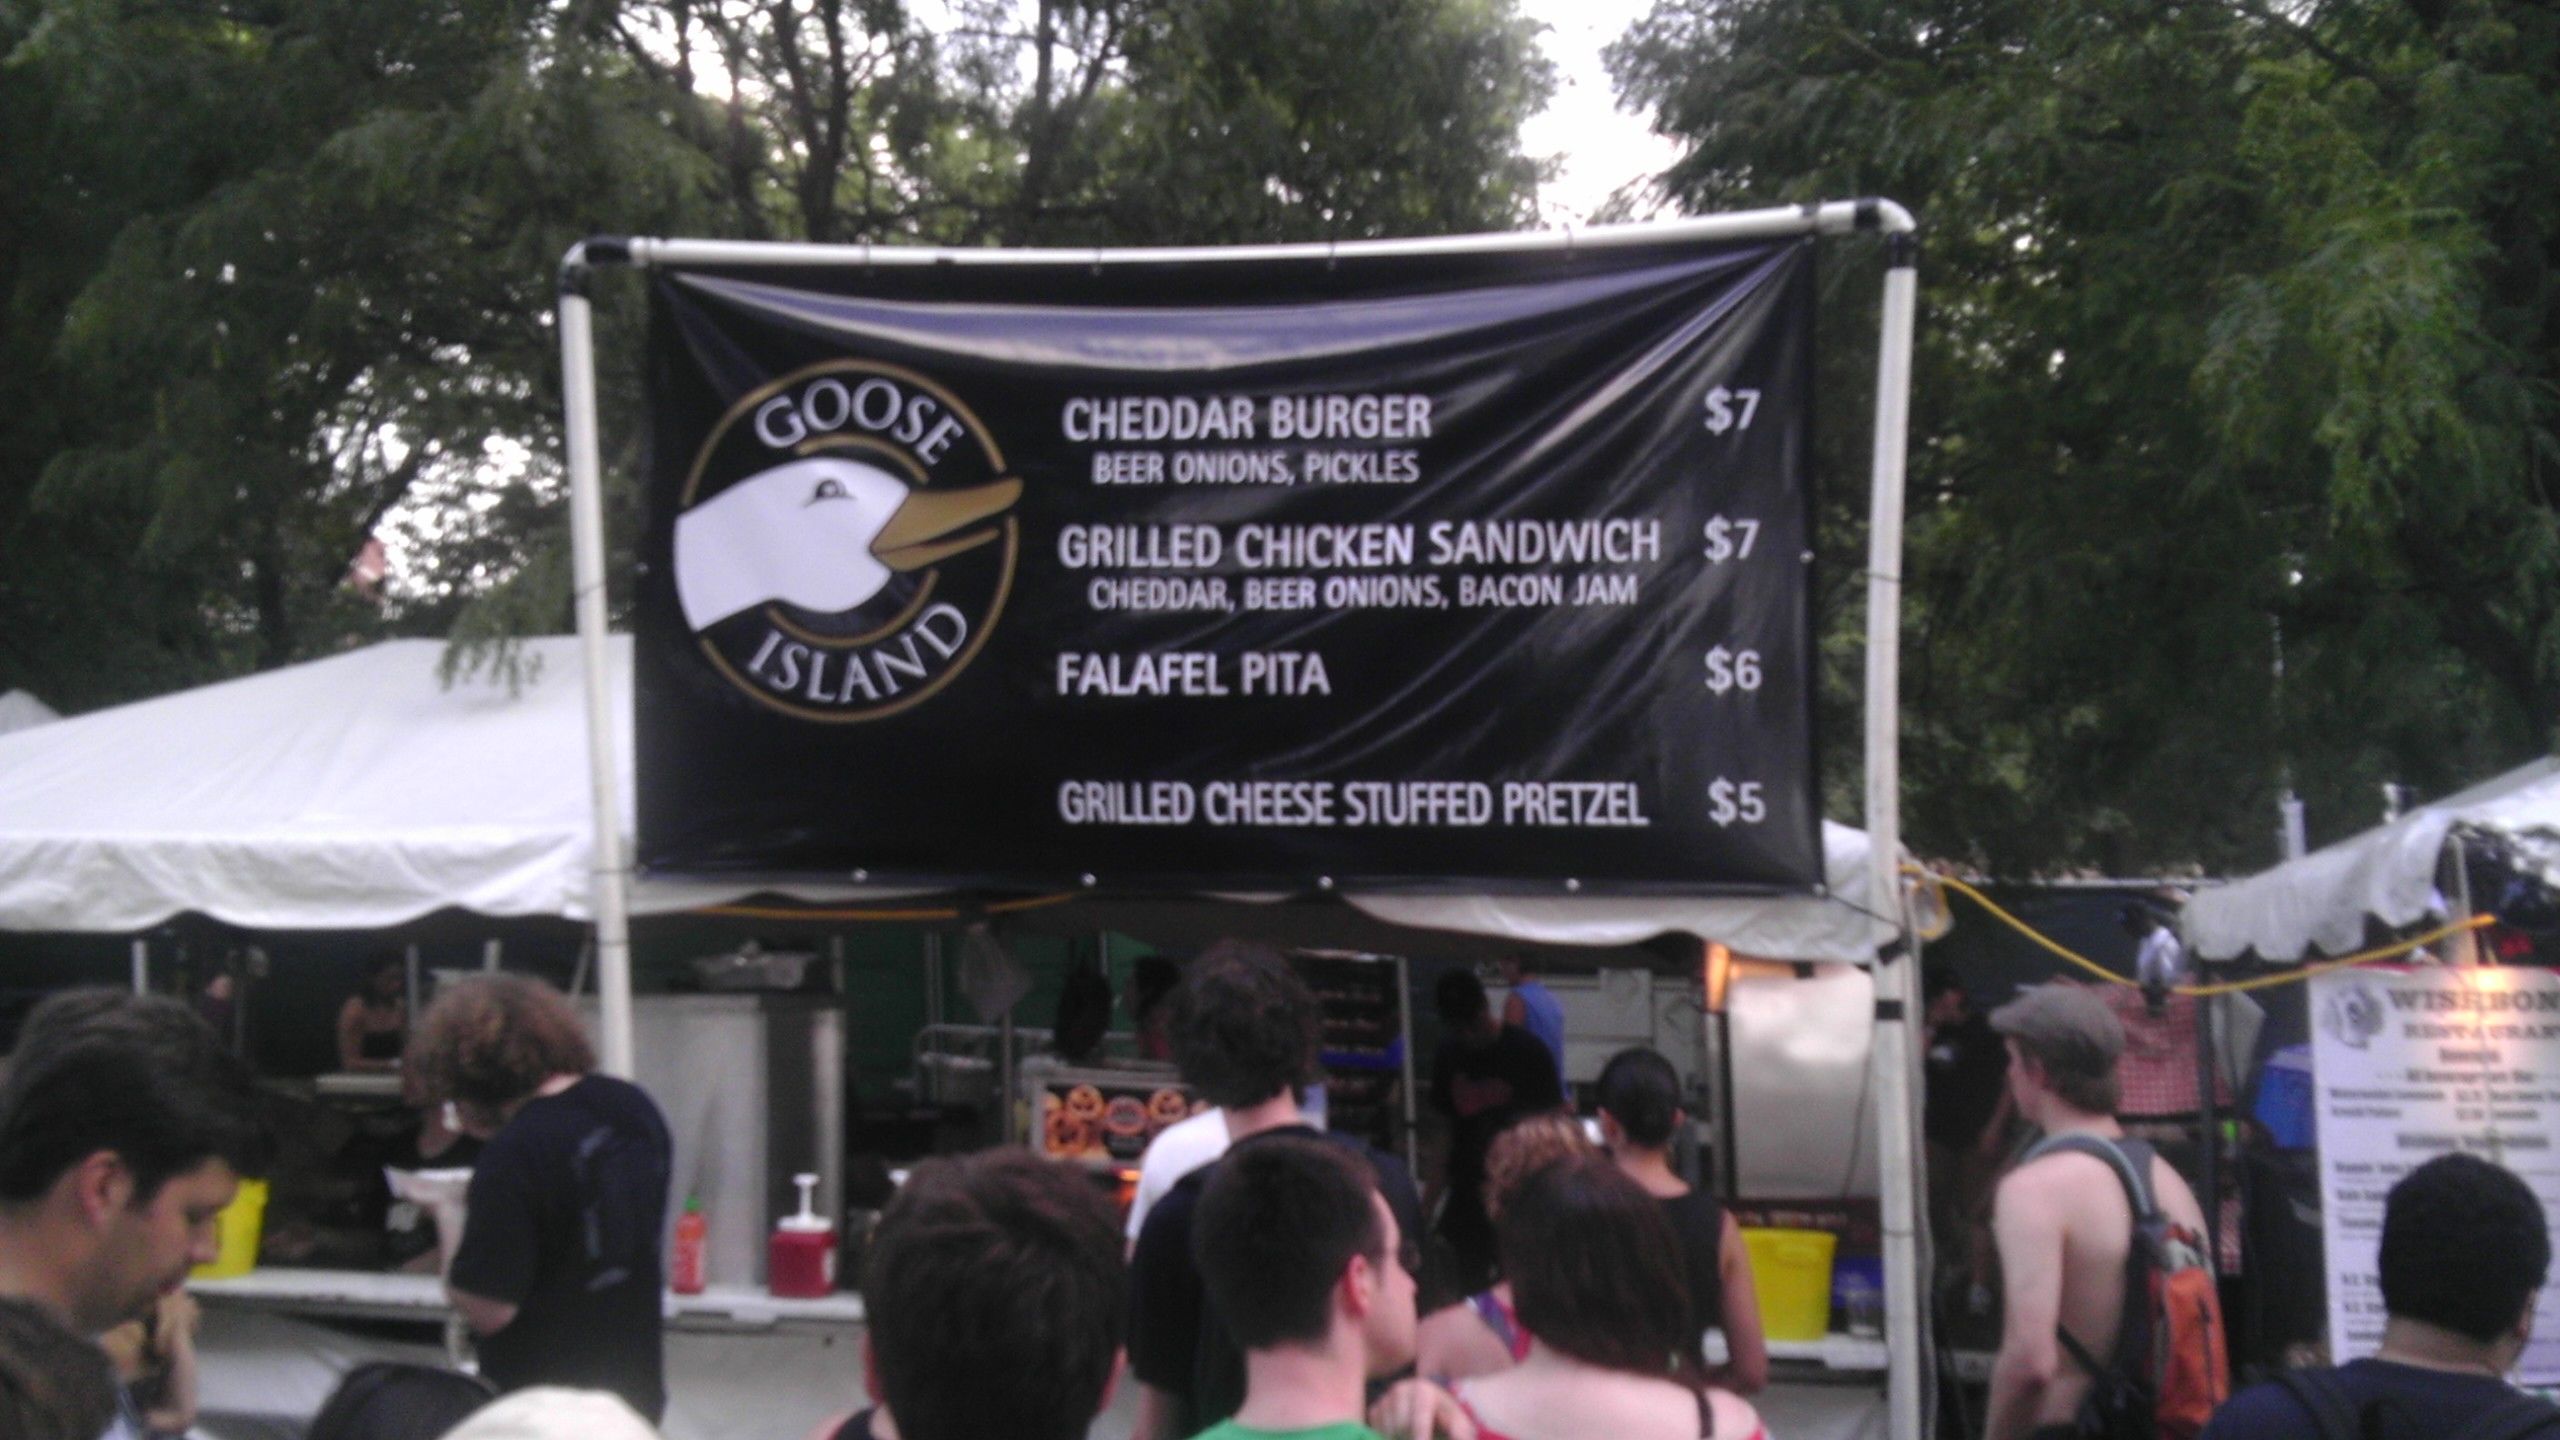 Banners for Goose Island at Pithcfork Music Fest.